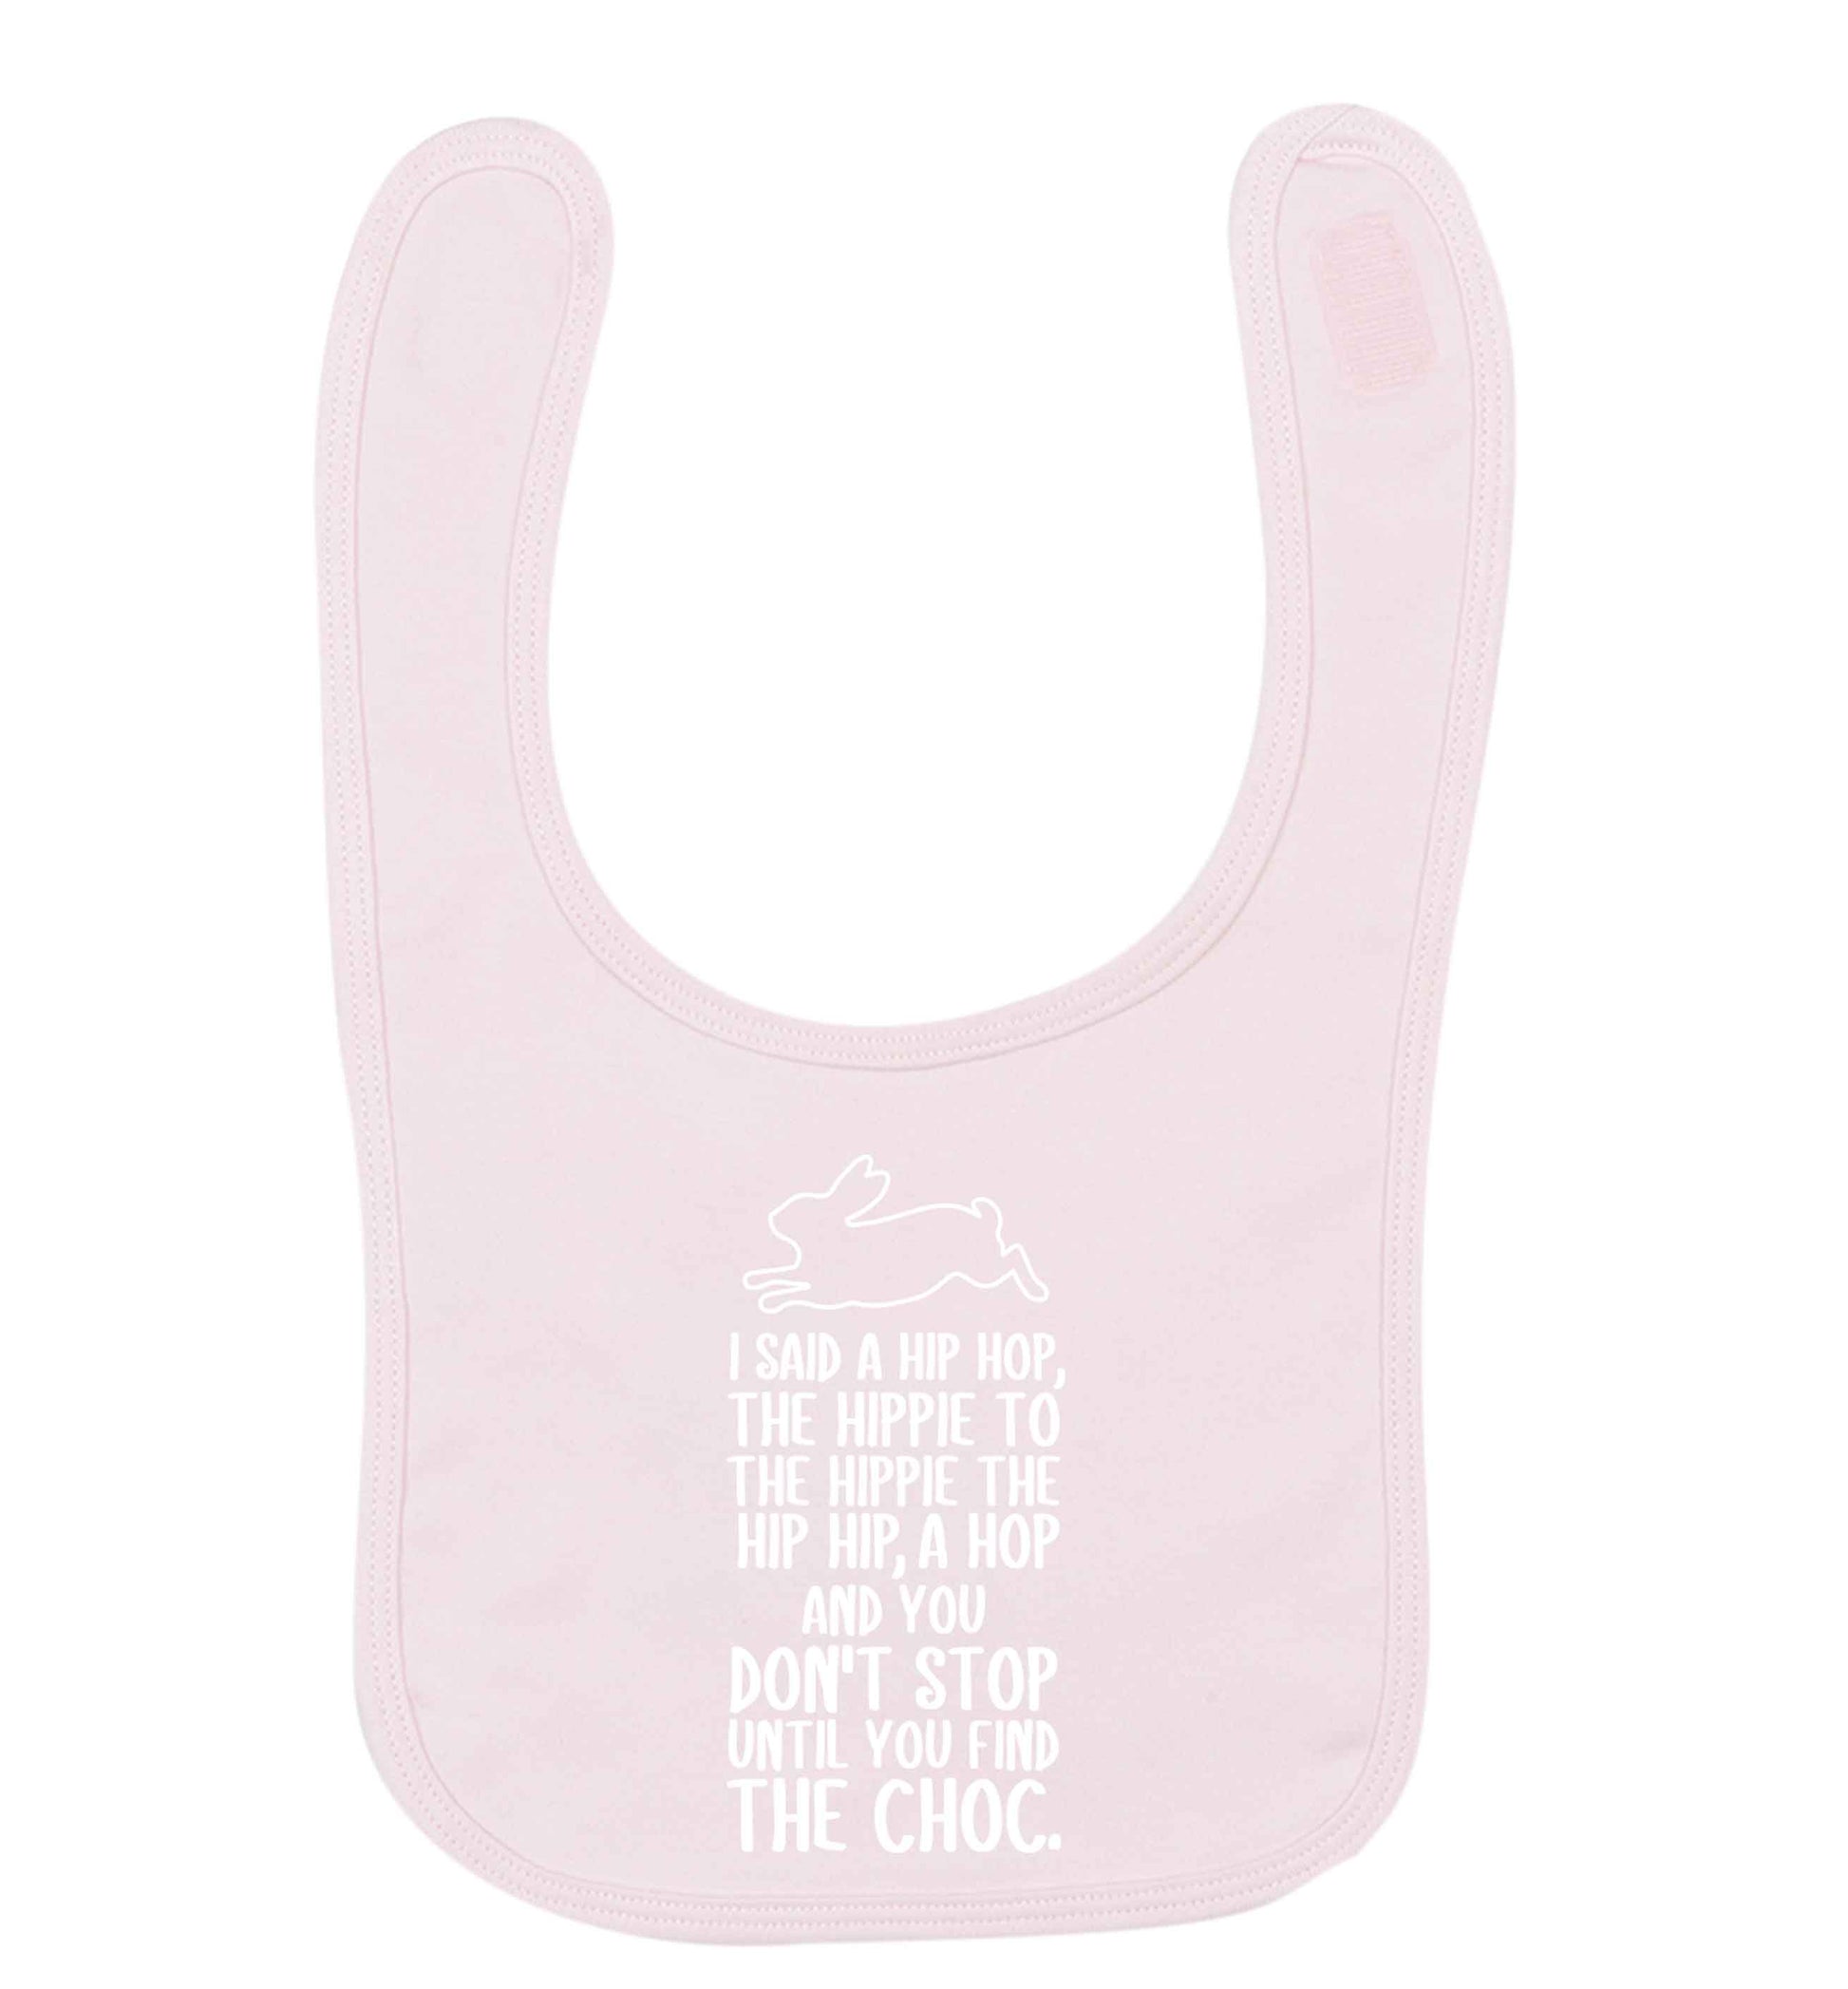 Don't stop until you find the choc pale pink baby bib